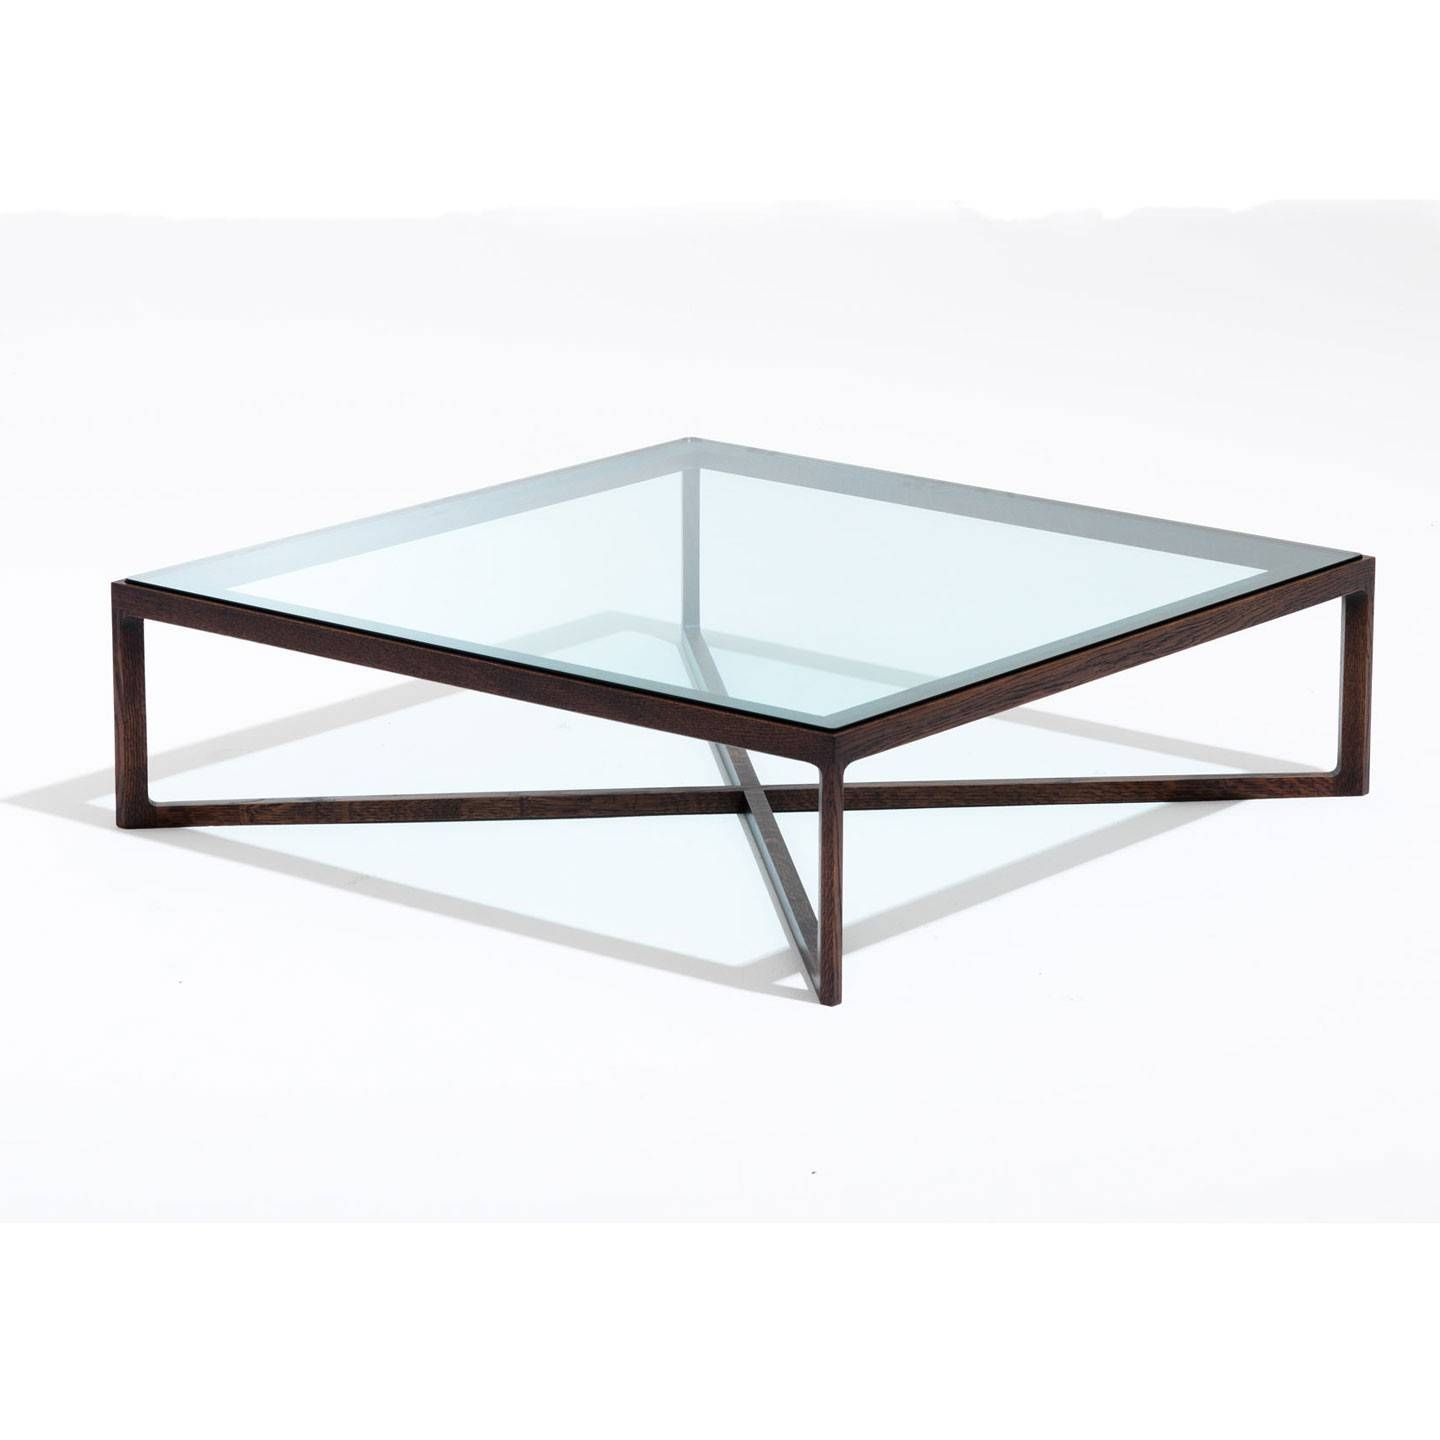 Square Coffee Table With Metal Legs | Coffee Tables Decoration Regarding Metal Square Coffee Tables (View 4 of 30)